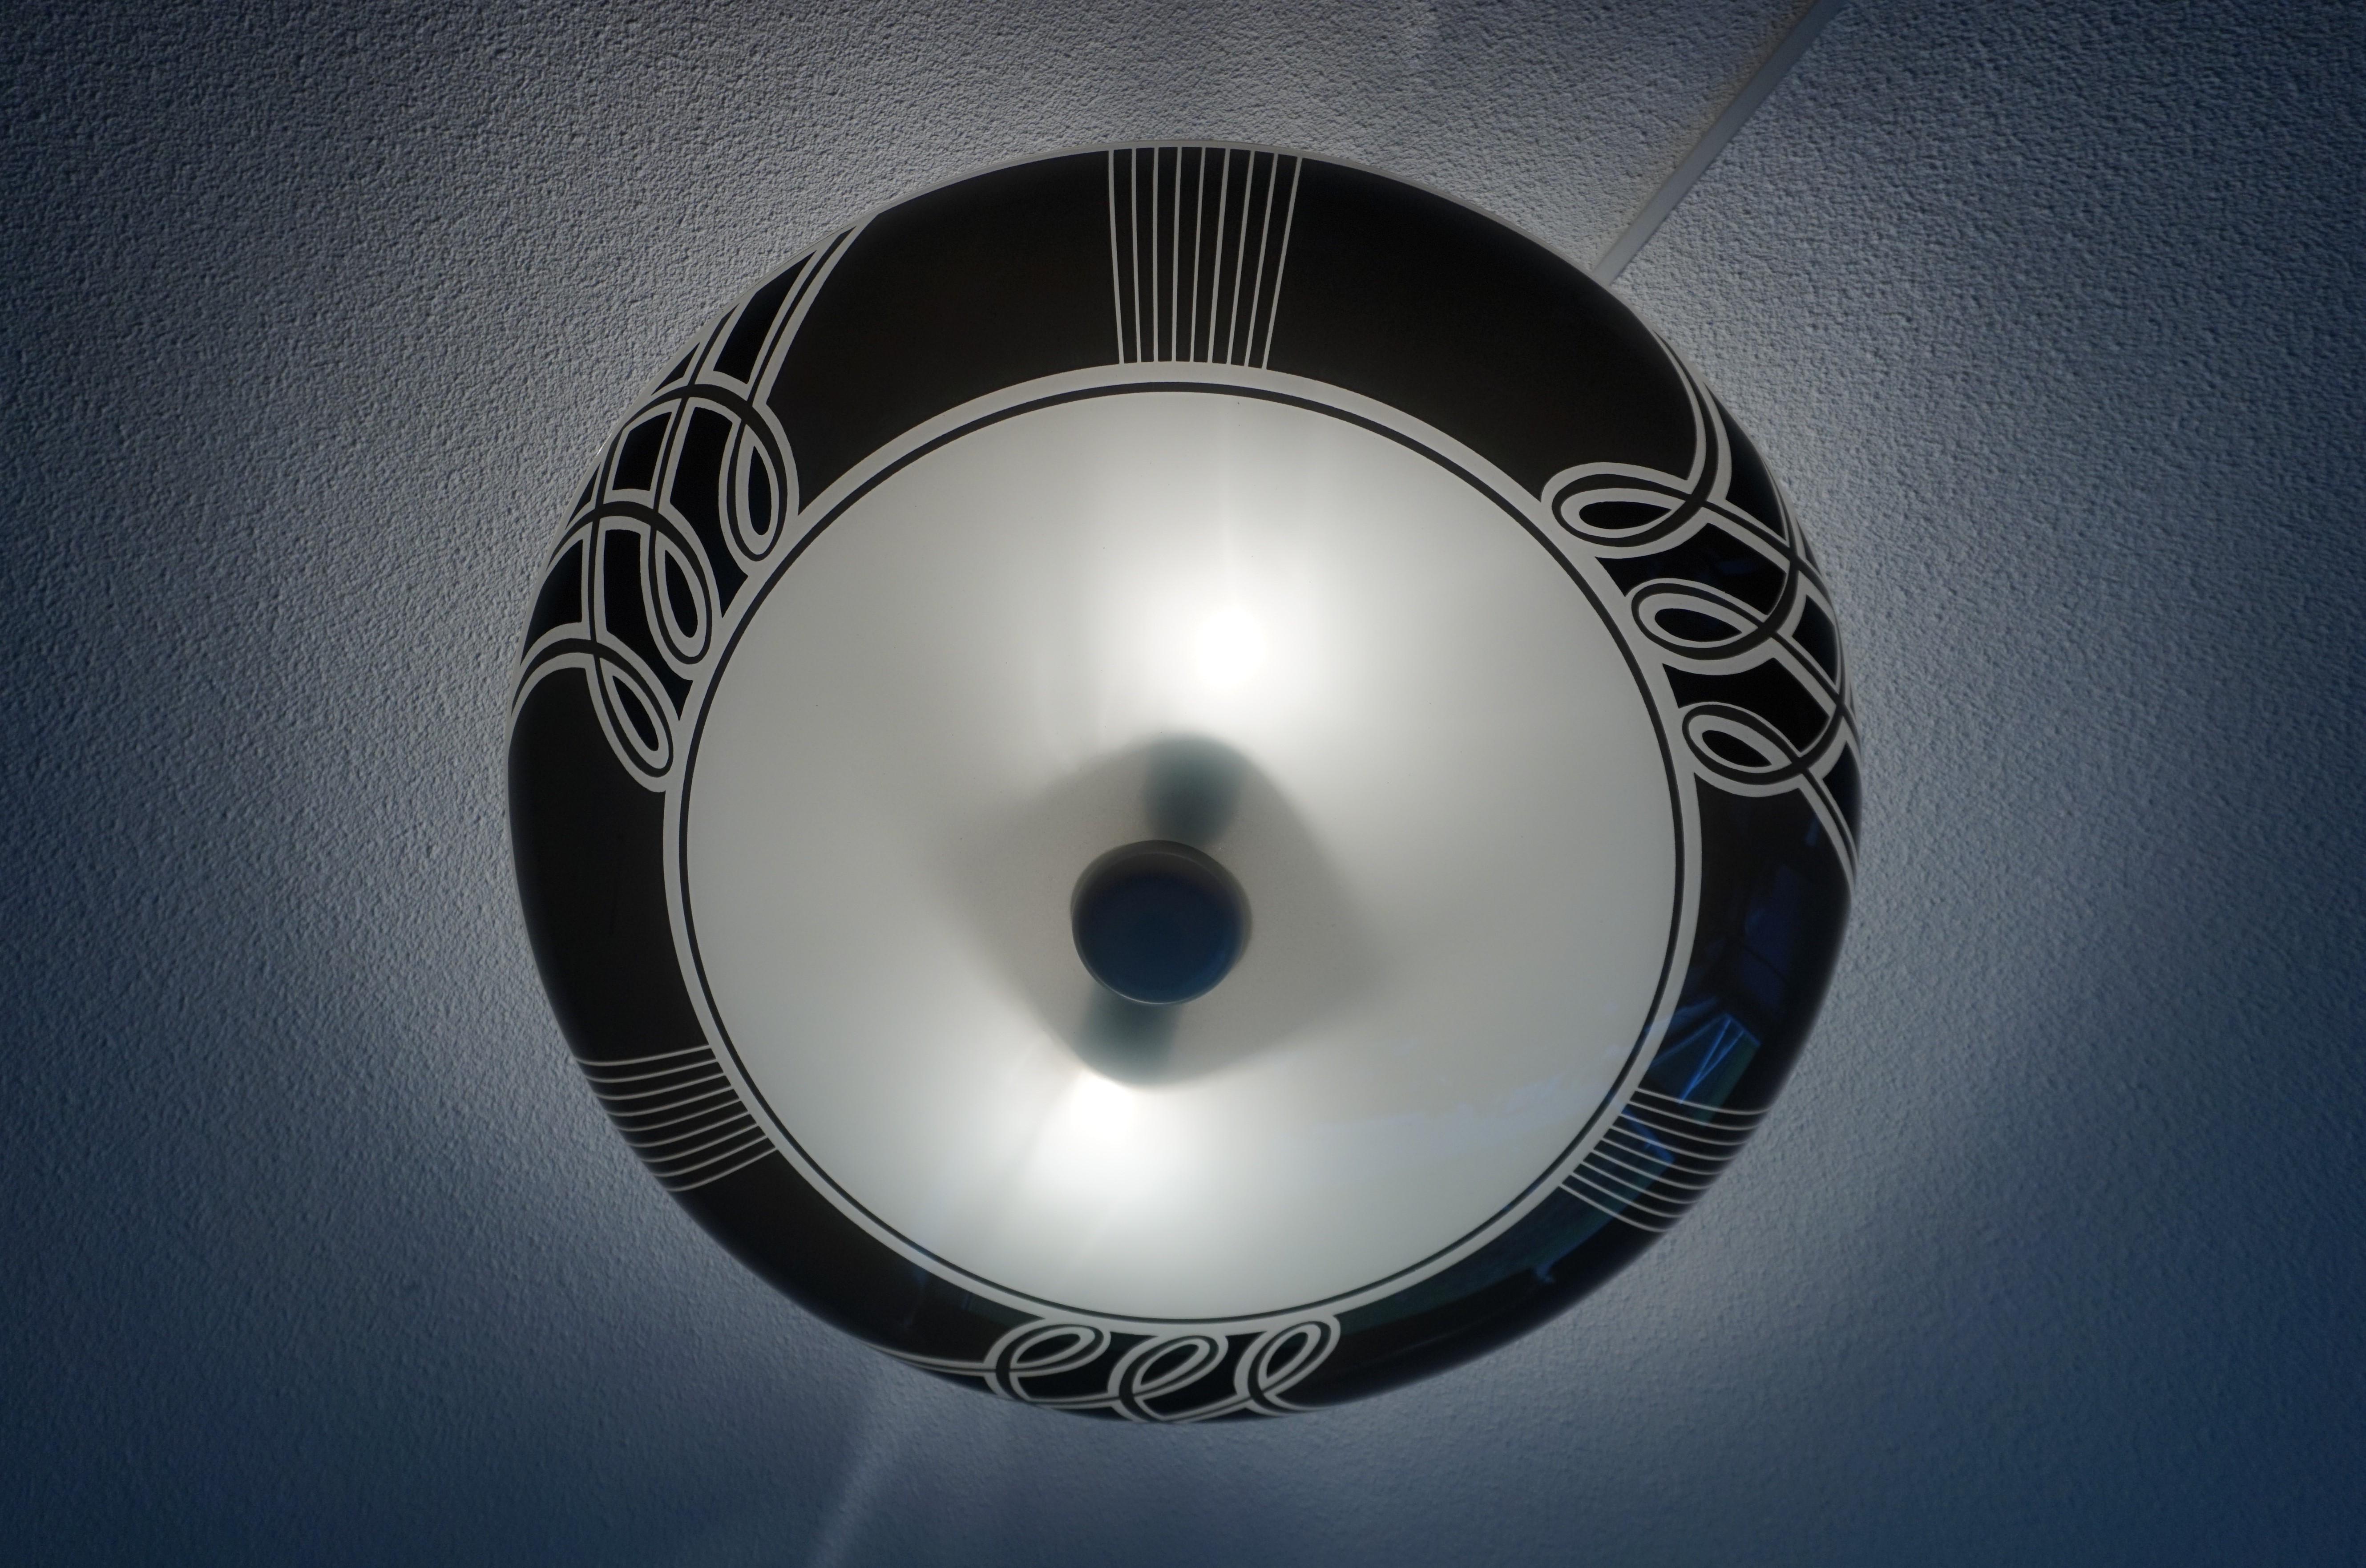 Rare and great looking, two-light midcentury flush mount.

This very stylish and large size midcentury light fixture with the unique black and white design is another one of our recent great finds. Both with the light switched on and off this fine